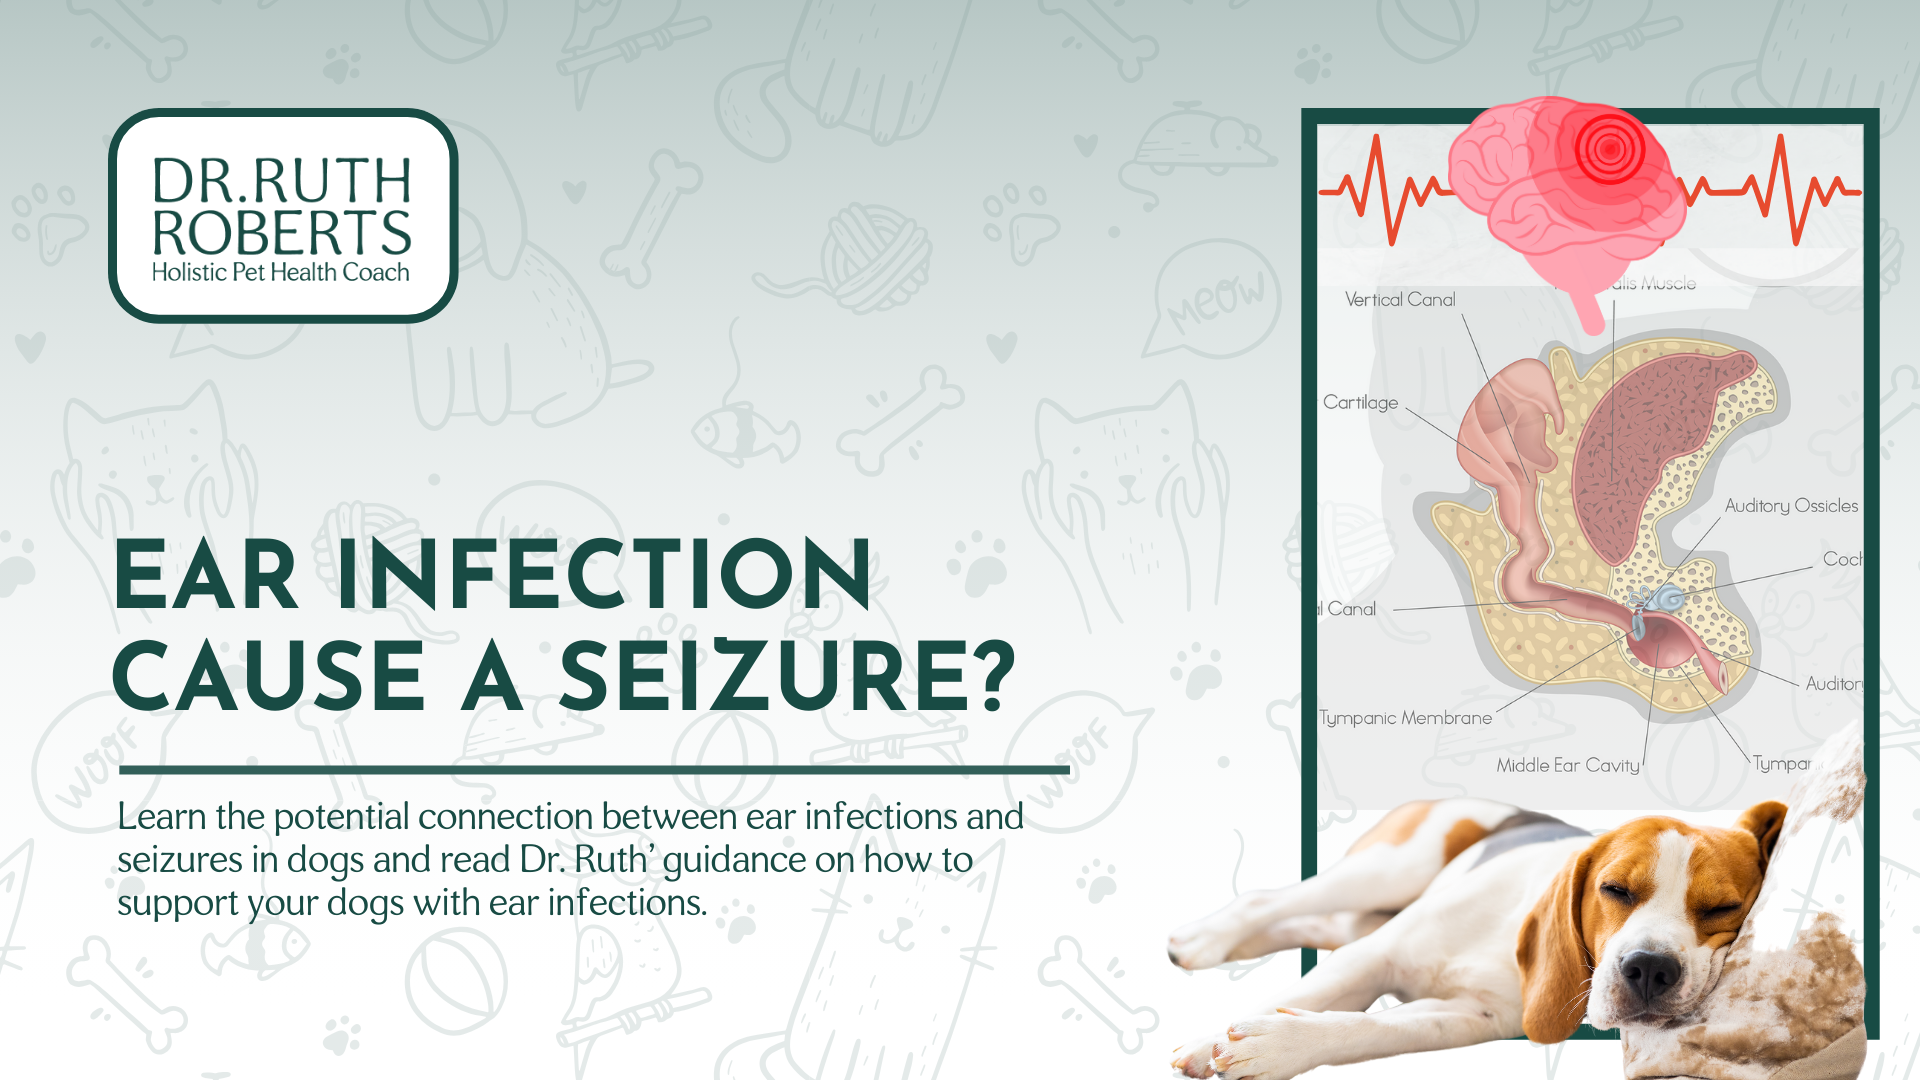 can ear infection cause seizure in dogs